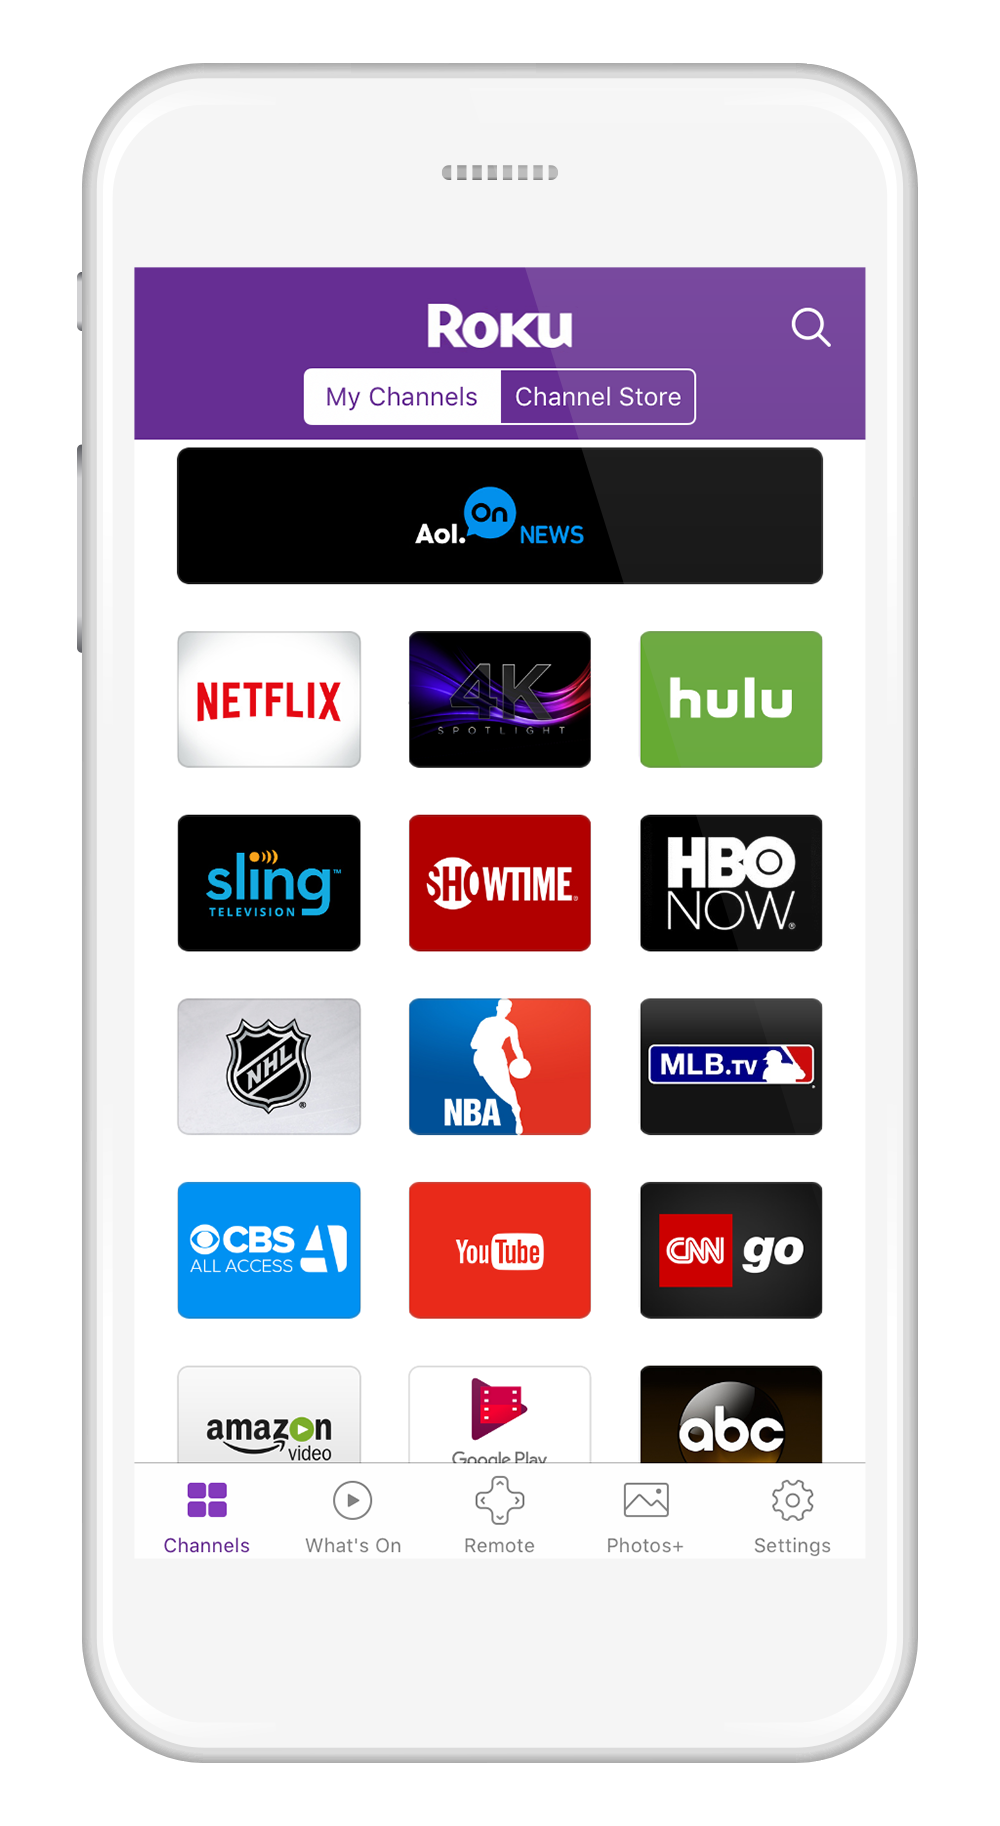 Updated Roku mobile app for iOS and Android